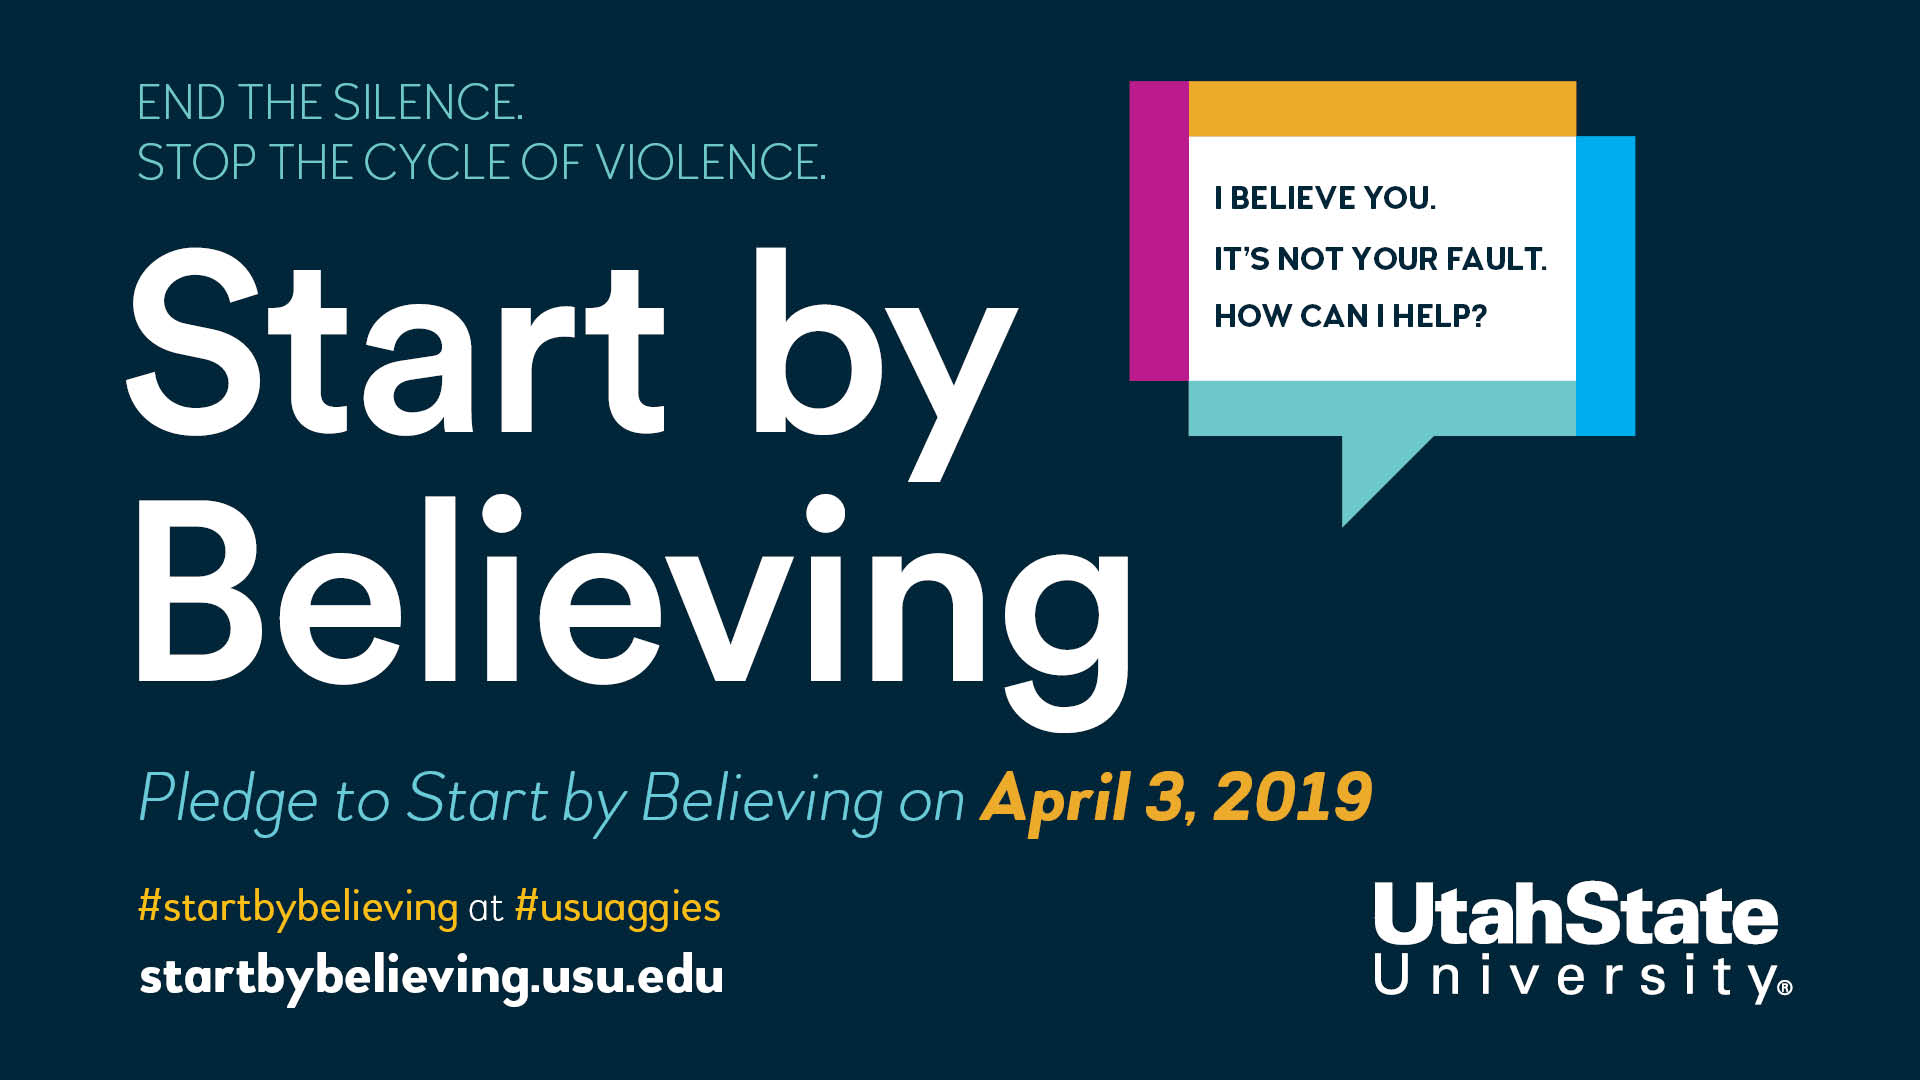 End the silence. Stop the cycle of violence. Start by believing. Pledge to start by believing on April 3, 2019 #startbybelieving at #usuaggies startbybelieving.usu.edu. Utah State University